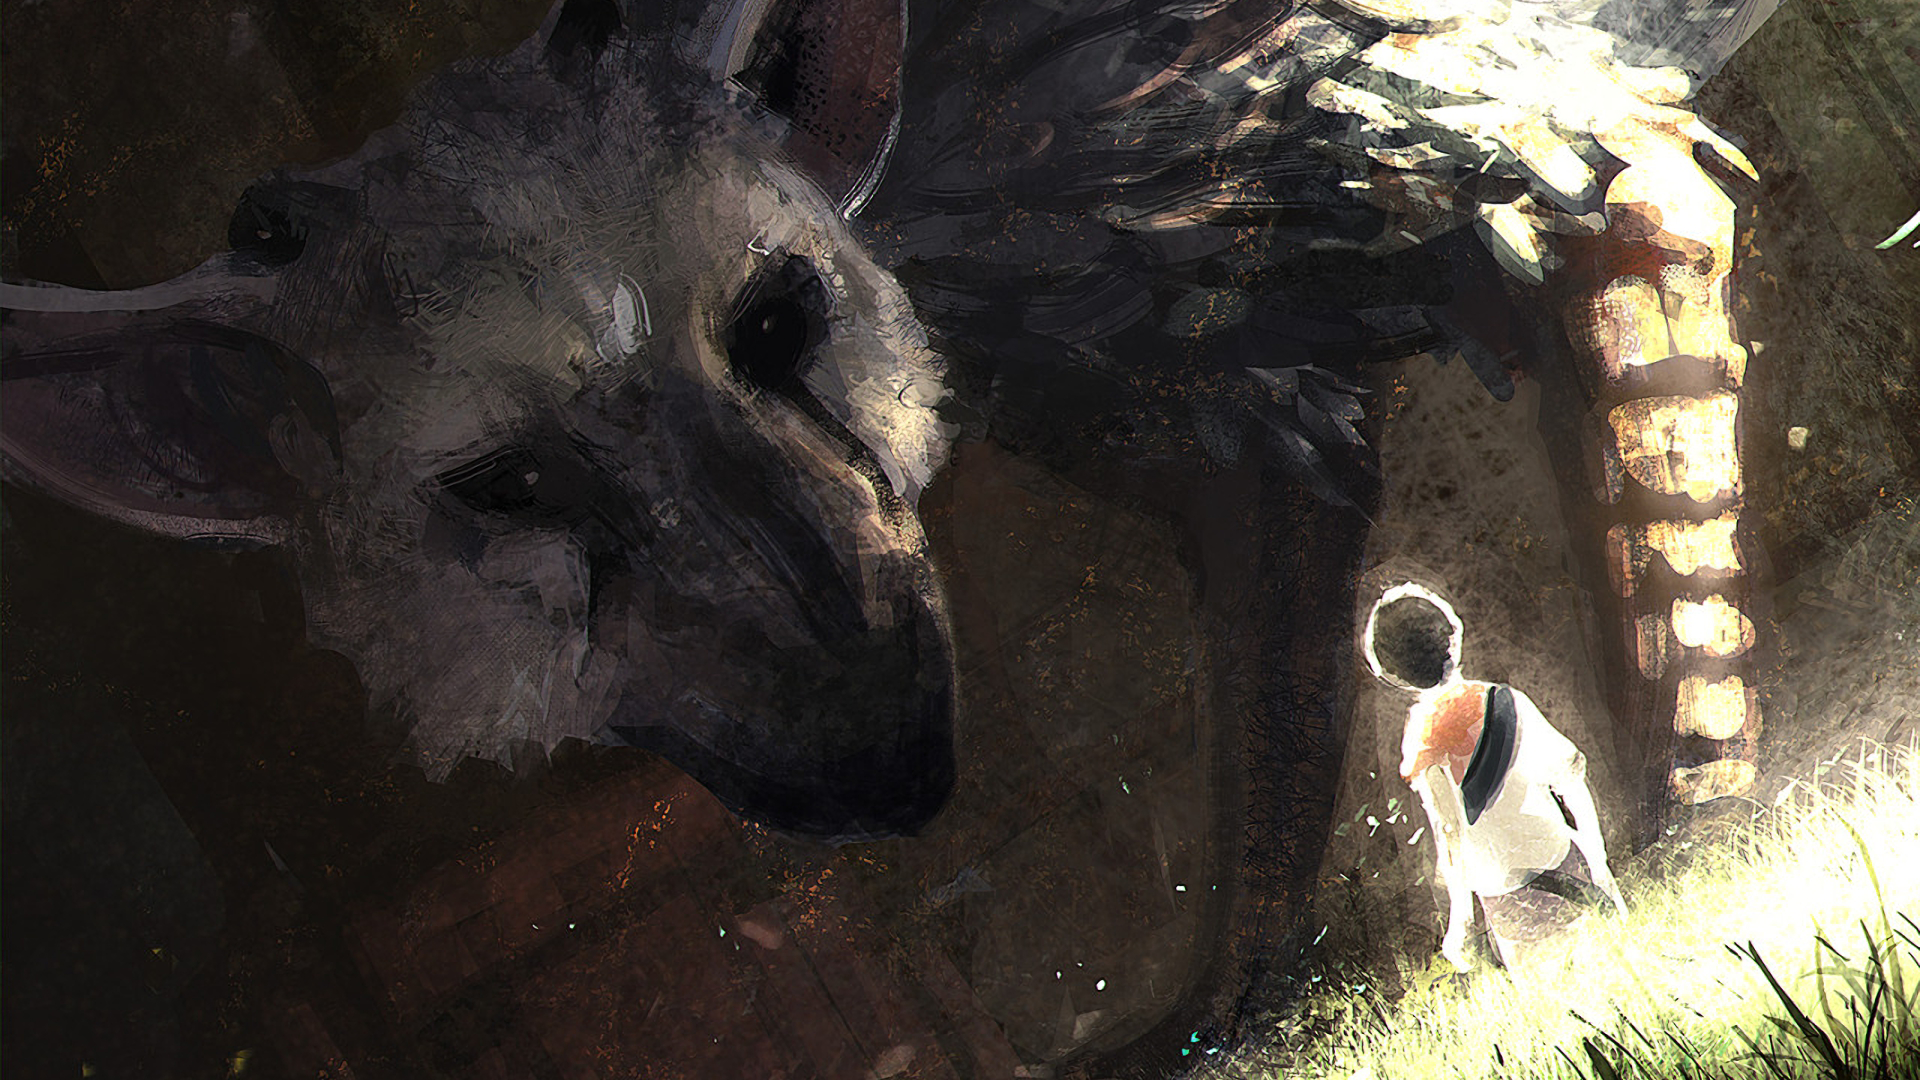 Trico The Last Guardian Wallpapers